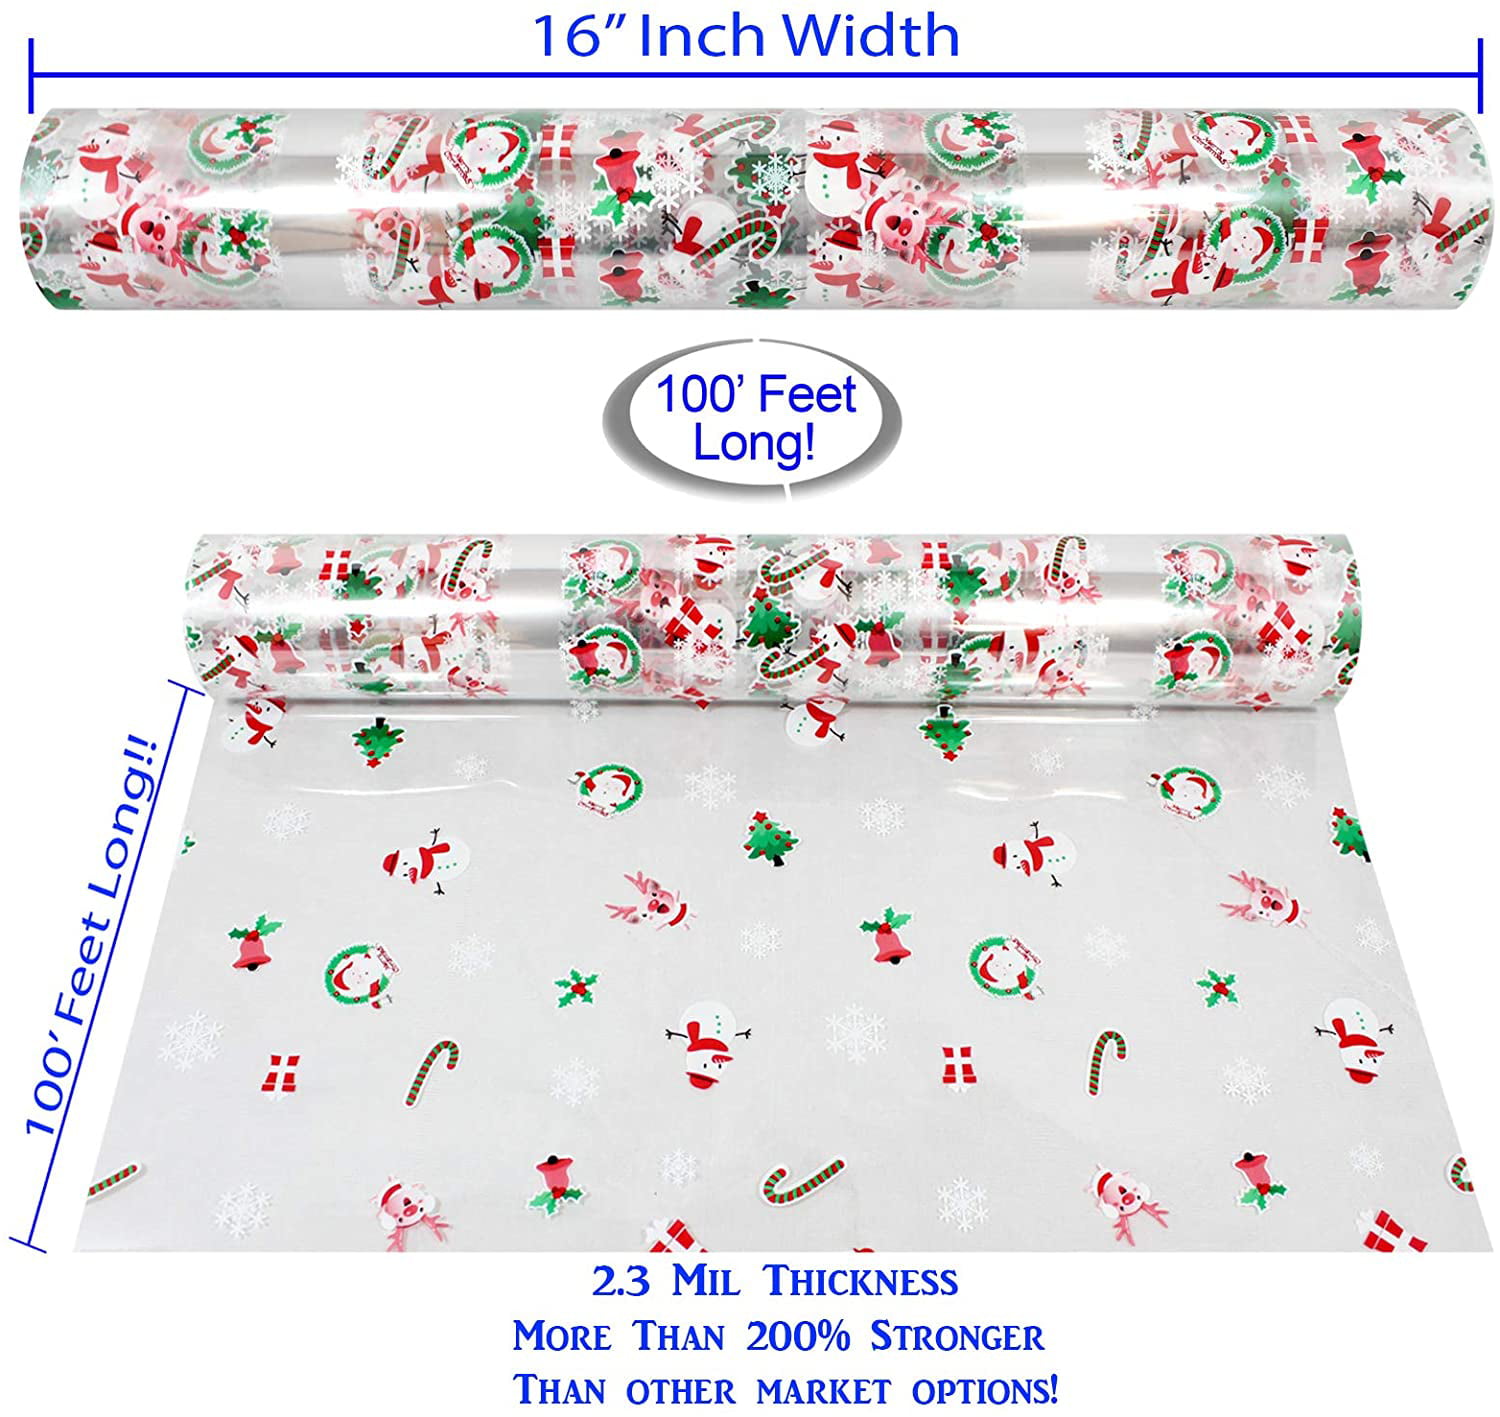 Christmas Cellophane Wrap Roll | 100' Ft. Long X 16” in. Wide | 2.3 Mil  Thick, Crystal Clear with Christmas Designs| Gifts, Baskets, Treats, Cello  Wrapping Paper | Santa, Snowman Cello Roll | Anapoliz - Walmart.com